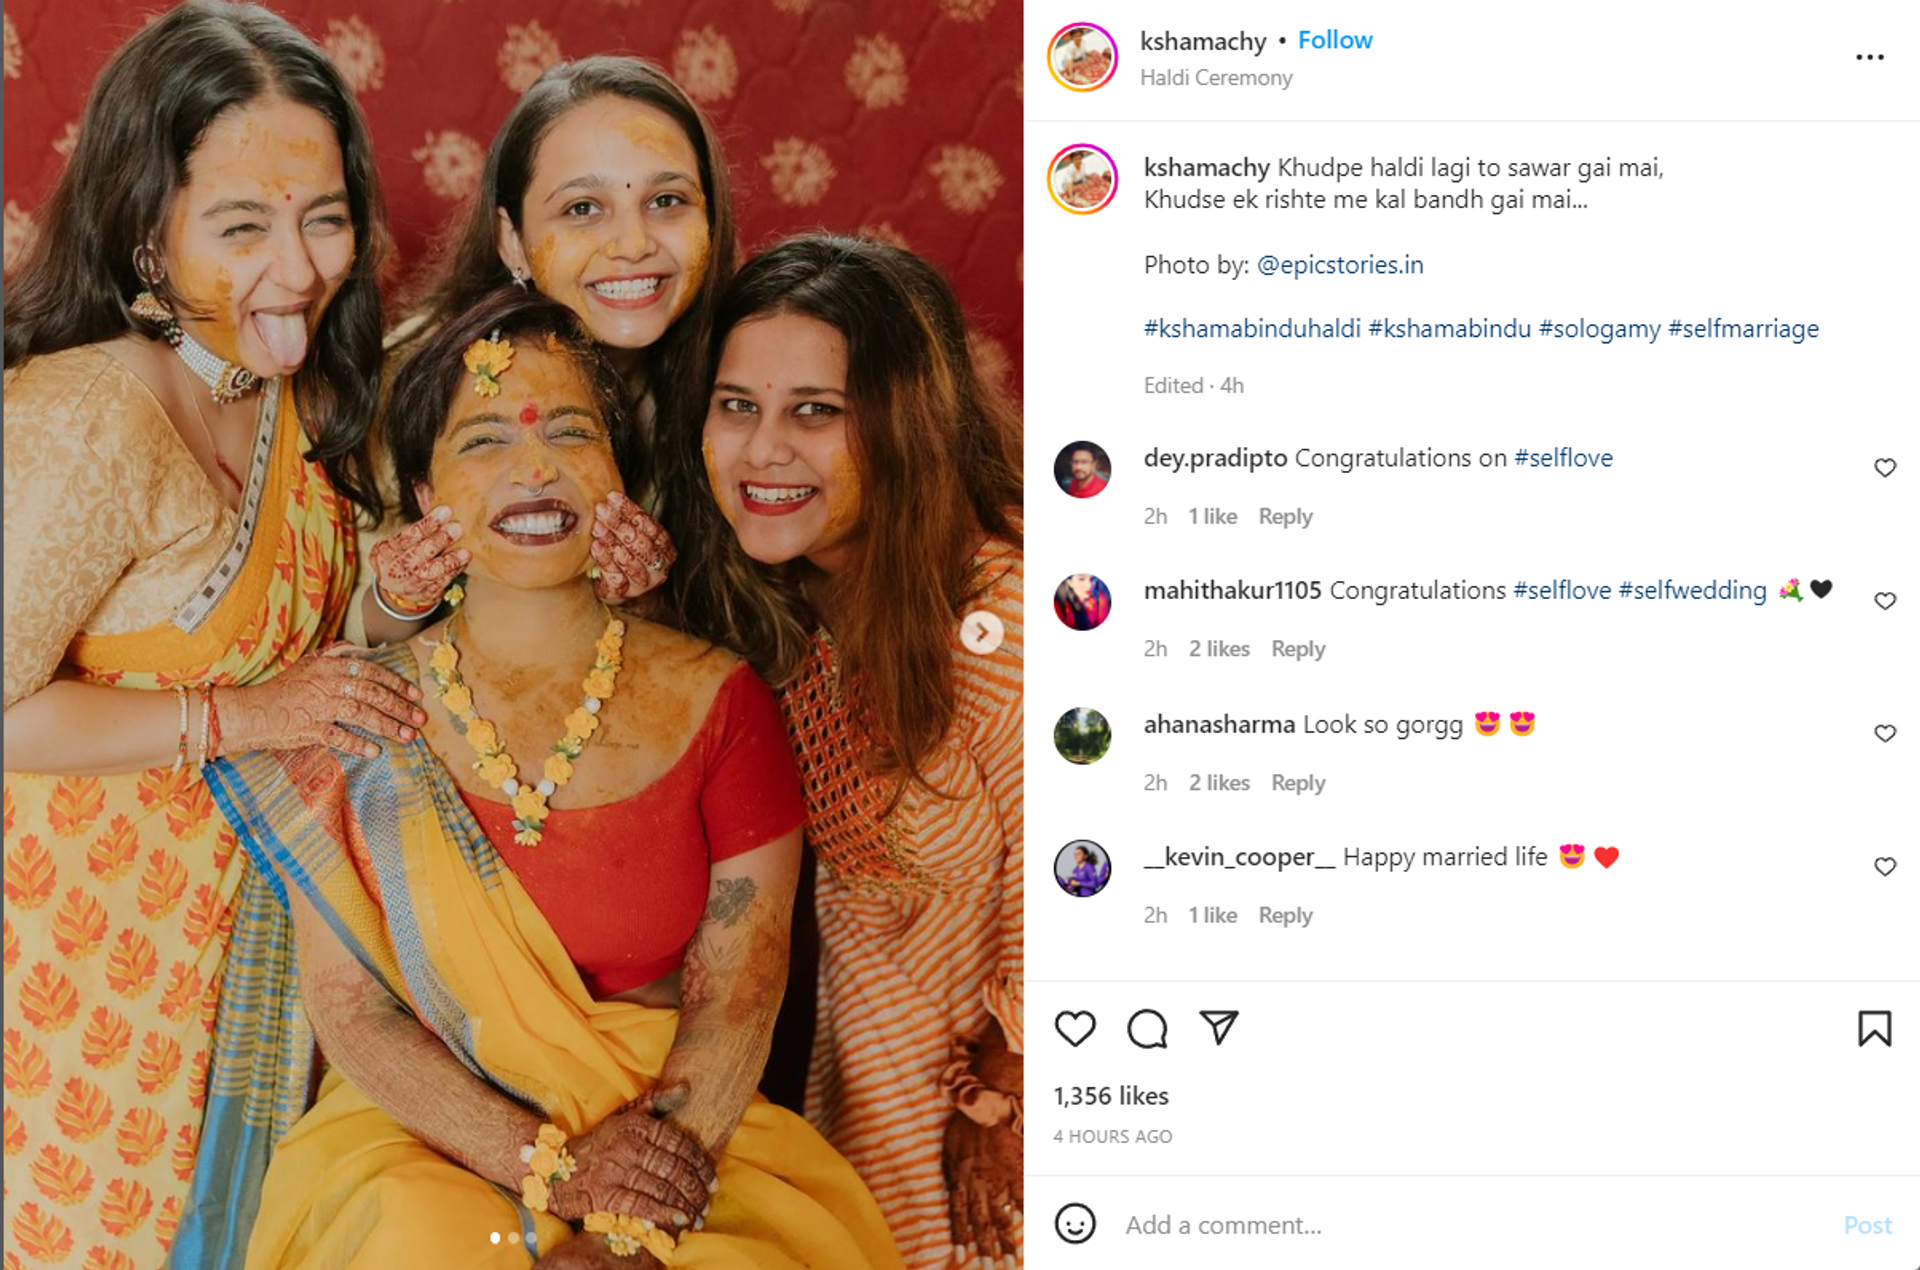 Kshama Bindu from India’s Gujarat state gets married to herself amid Hindu wedding rituals, marking the country's first sologamy marriage. - Sputnik International, 1920, 09.06.2022